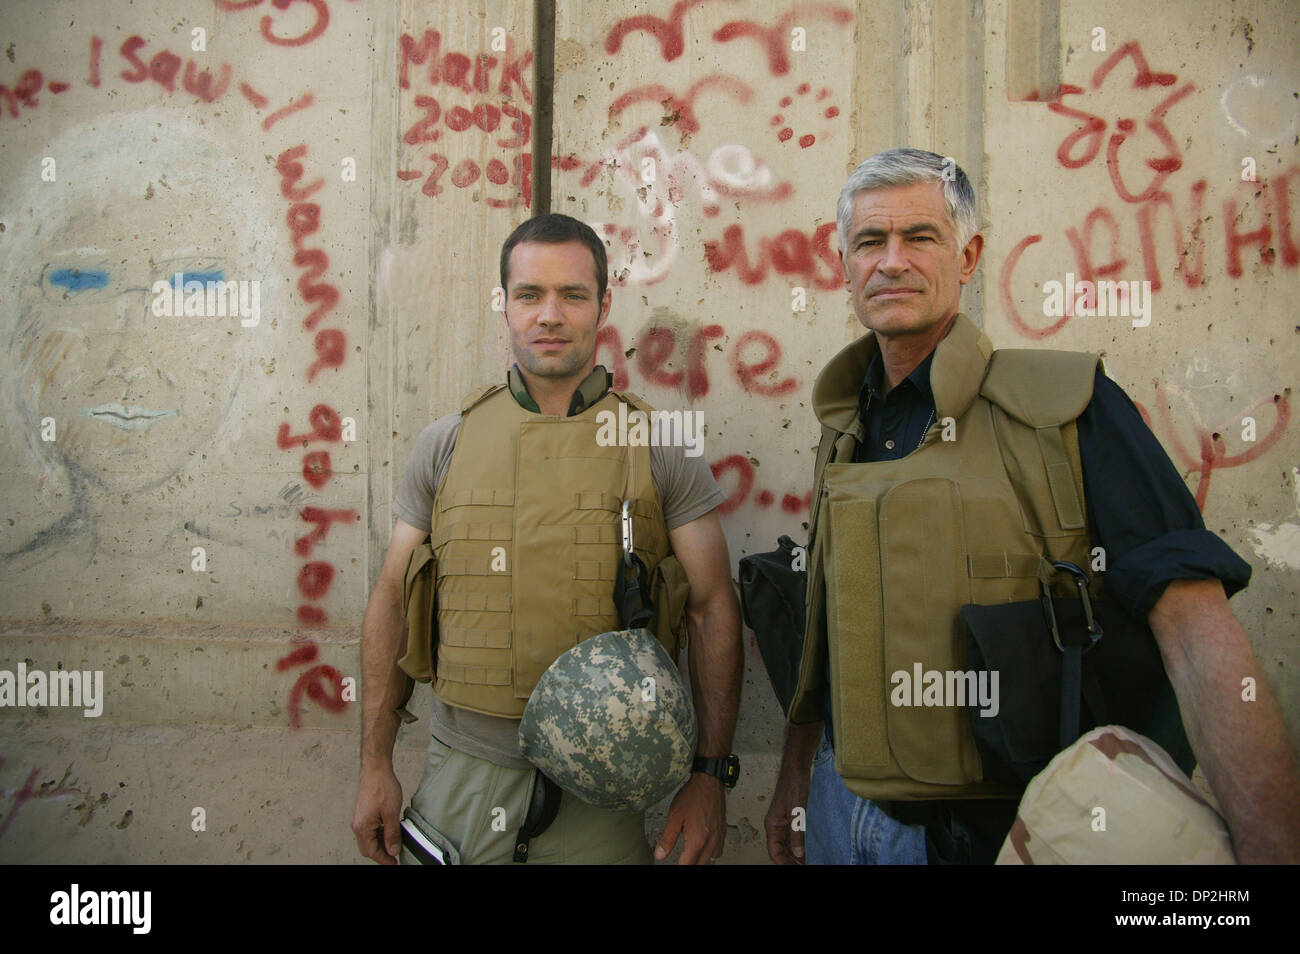 Jun 05, 2006; Baghdad, IRAQ; National Geographic staff writer NEIL SHEA (L) and photographer JAMES NACHTWEY (R) while on assignment together for National Geographic in Baghdad June 5 2006. Mandatory Credit: Photo by David Honl/ZUMA Press. (©) Copyright 2006 by David Honl Stock Photo